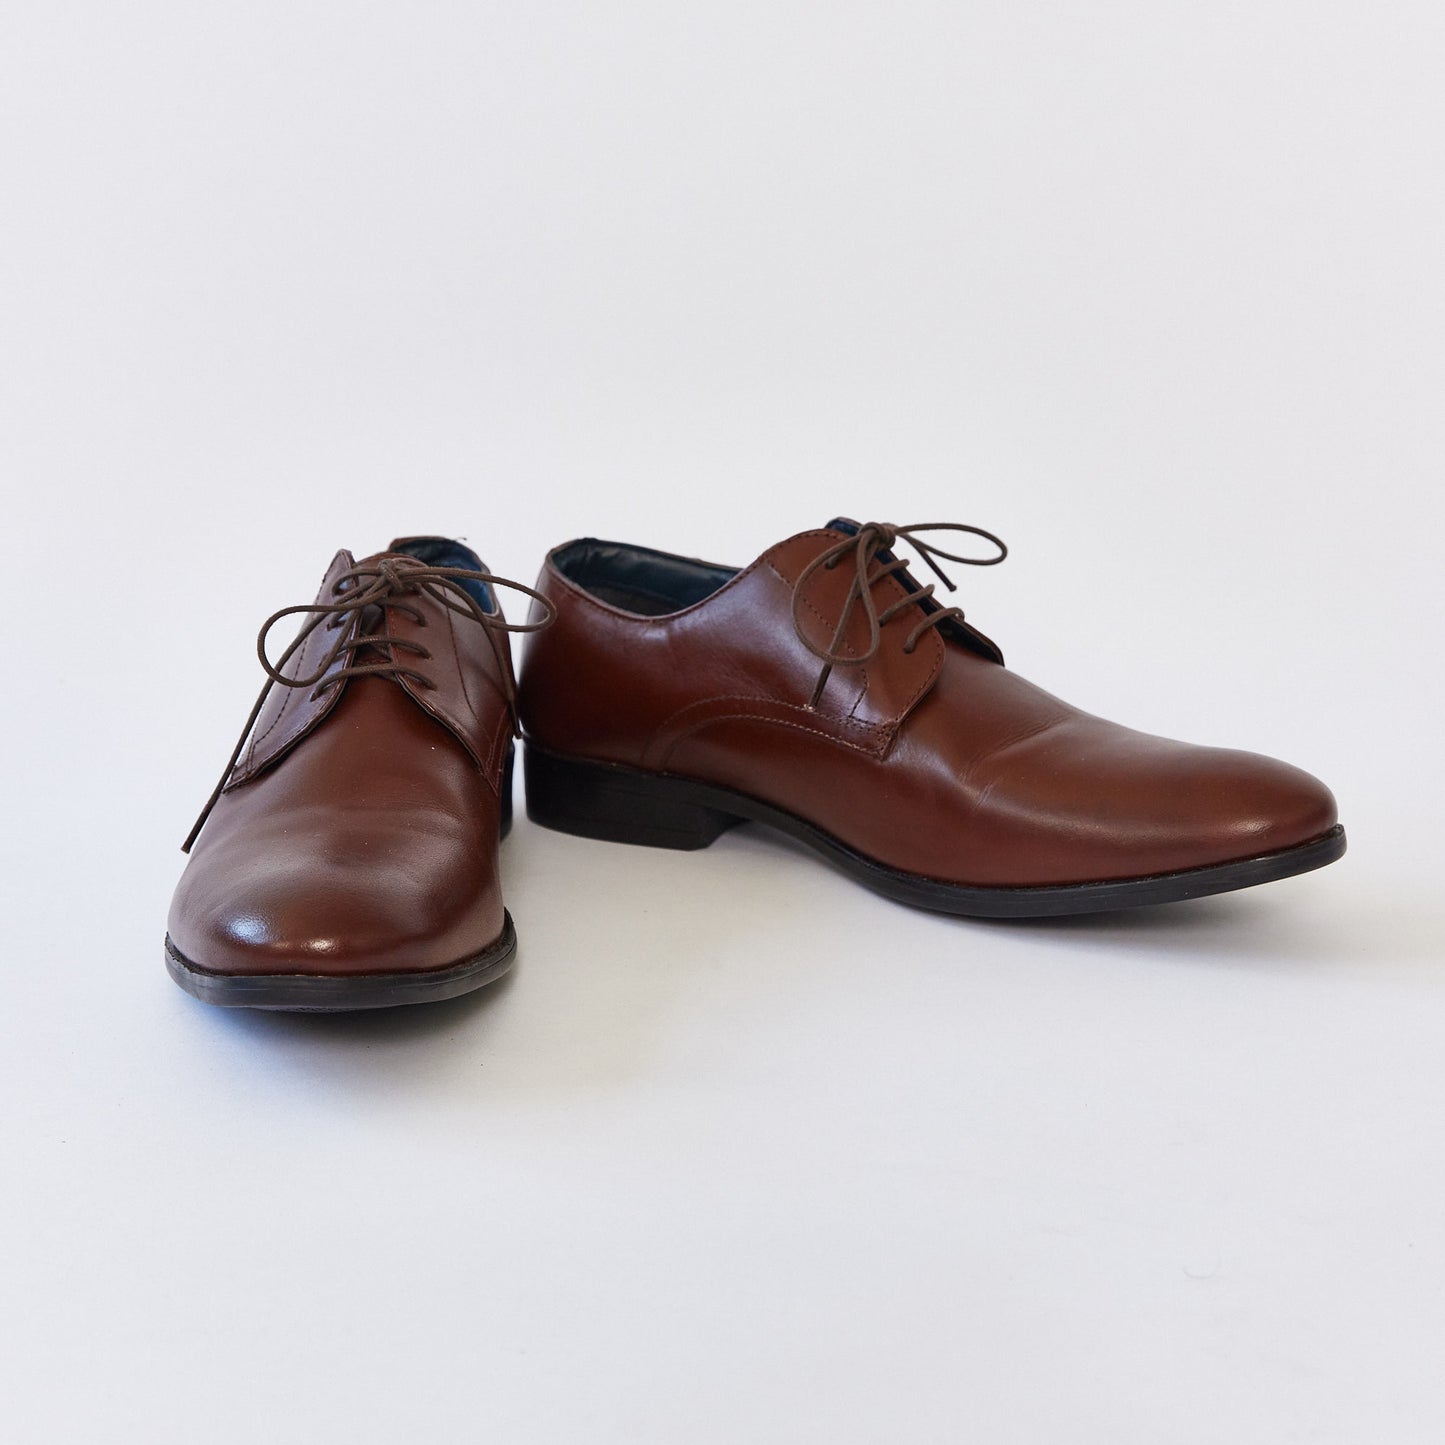 Brown Derby Shoes size 10